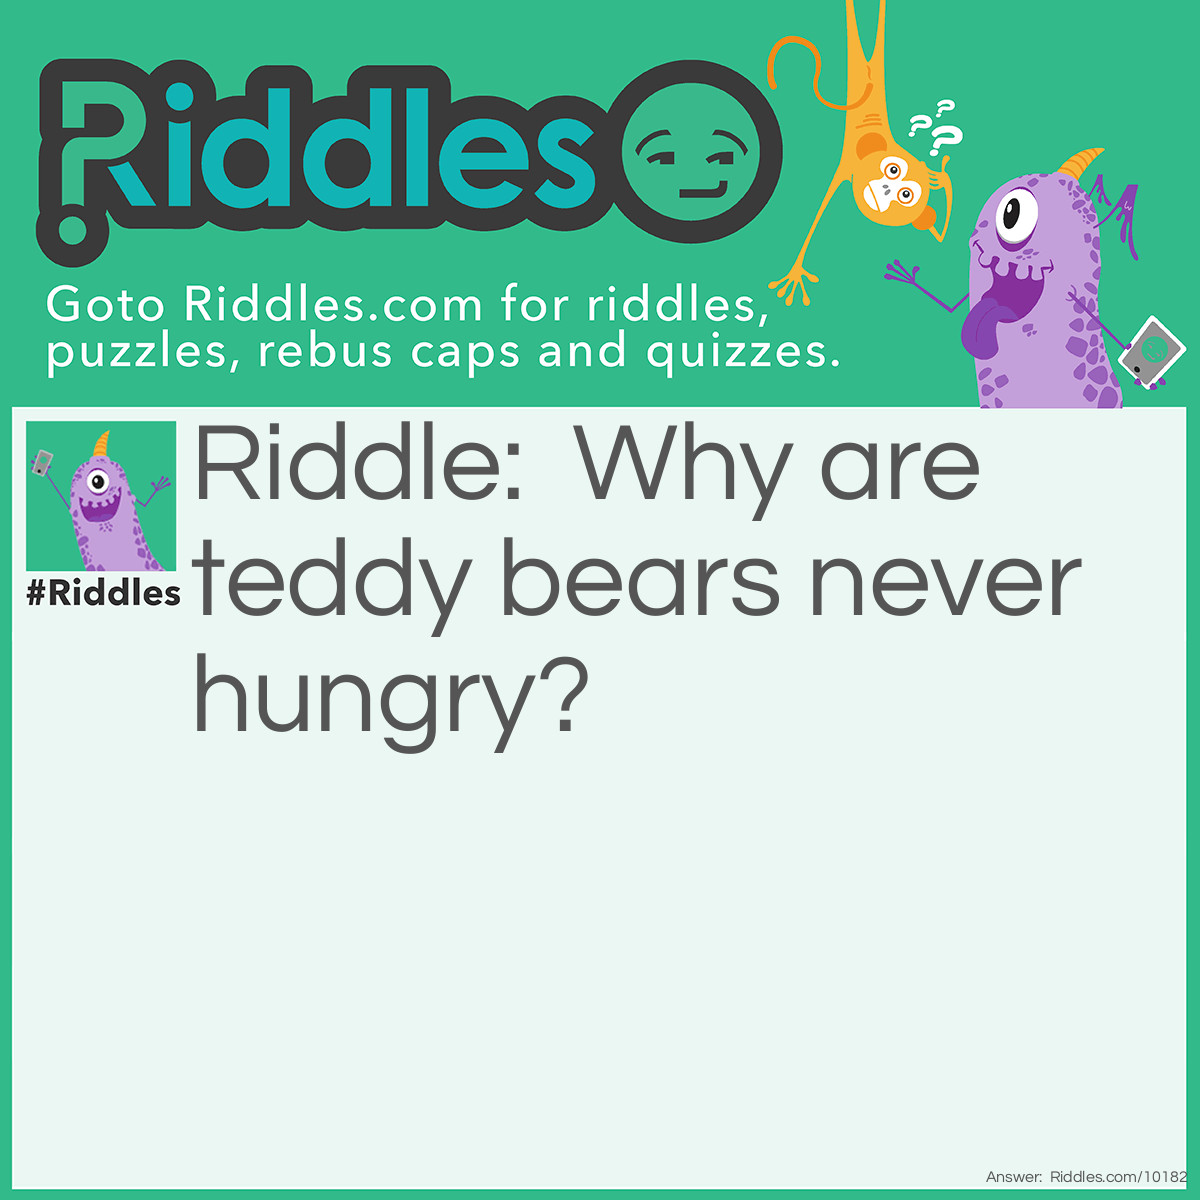 Riddle: Why are teddy bears never hungry? Answer: Because they are always stuffed